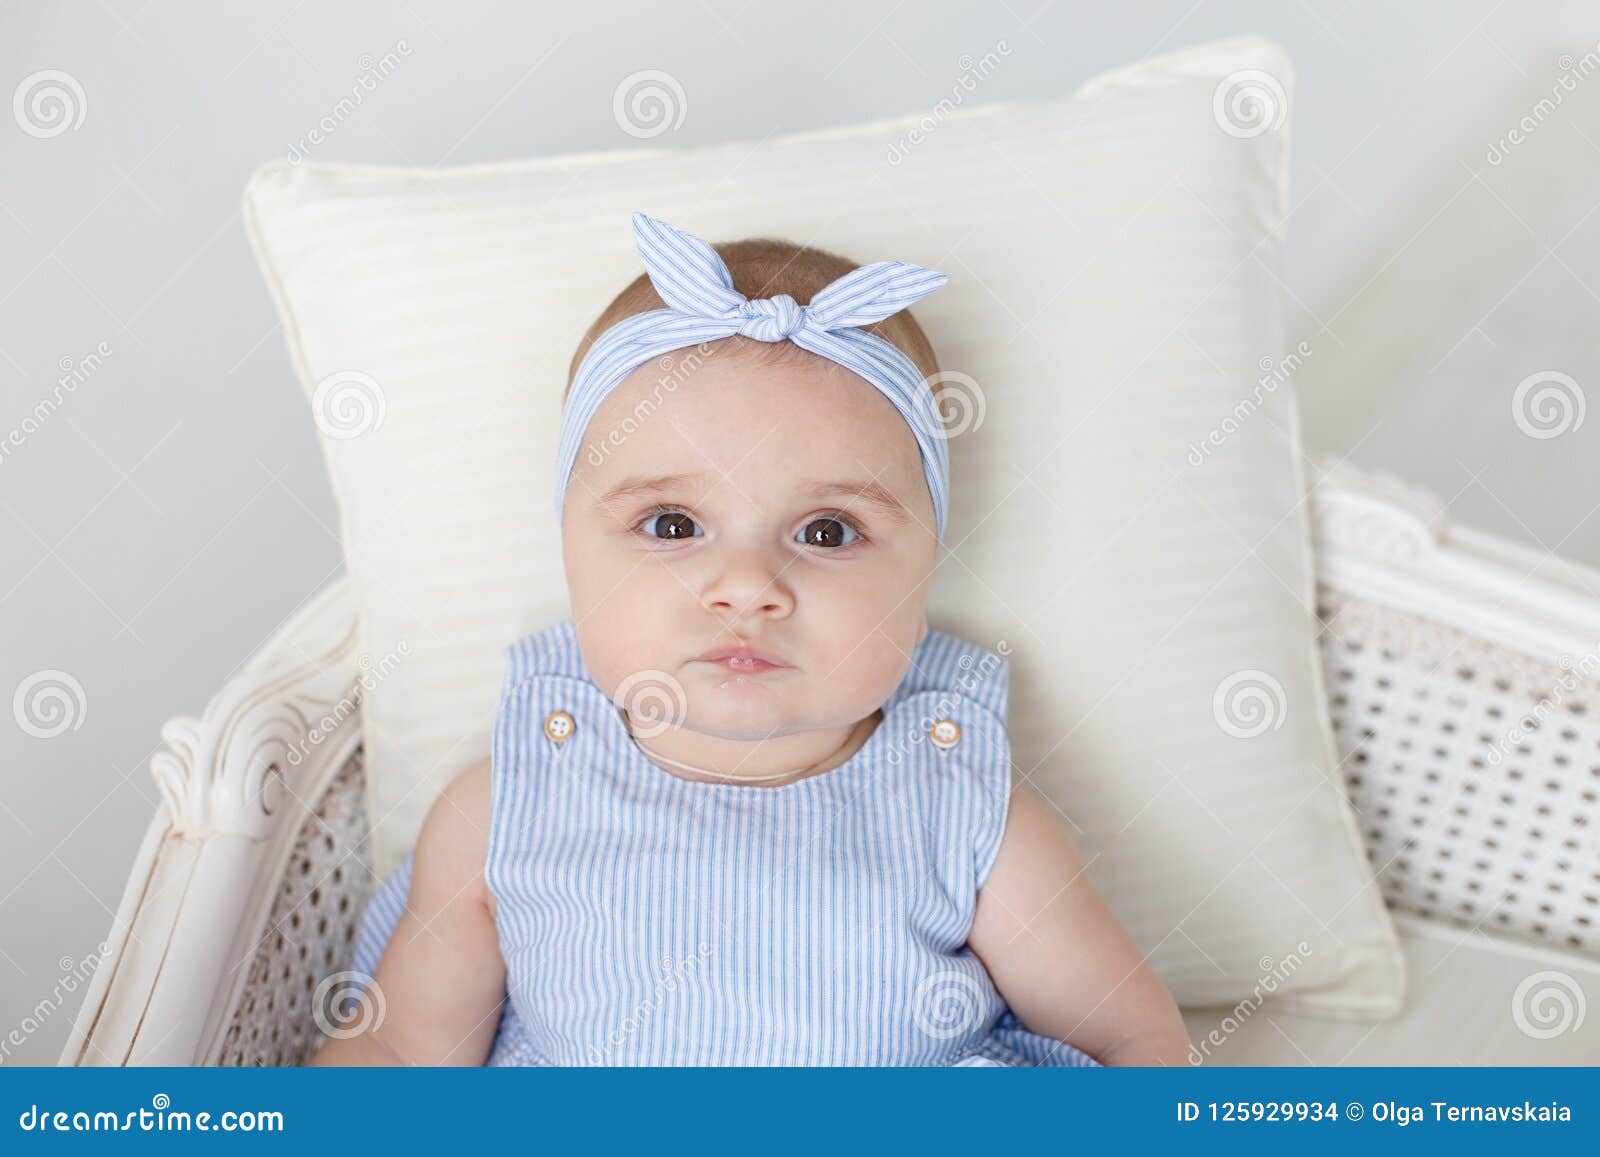 Image of Sweet Baby Girl in a Wreath, Closeup Portrait of Cute 6 ...